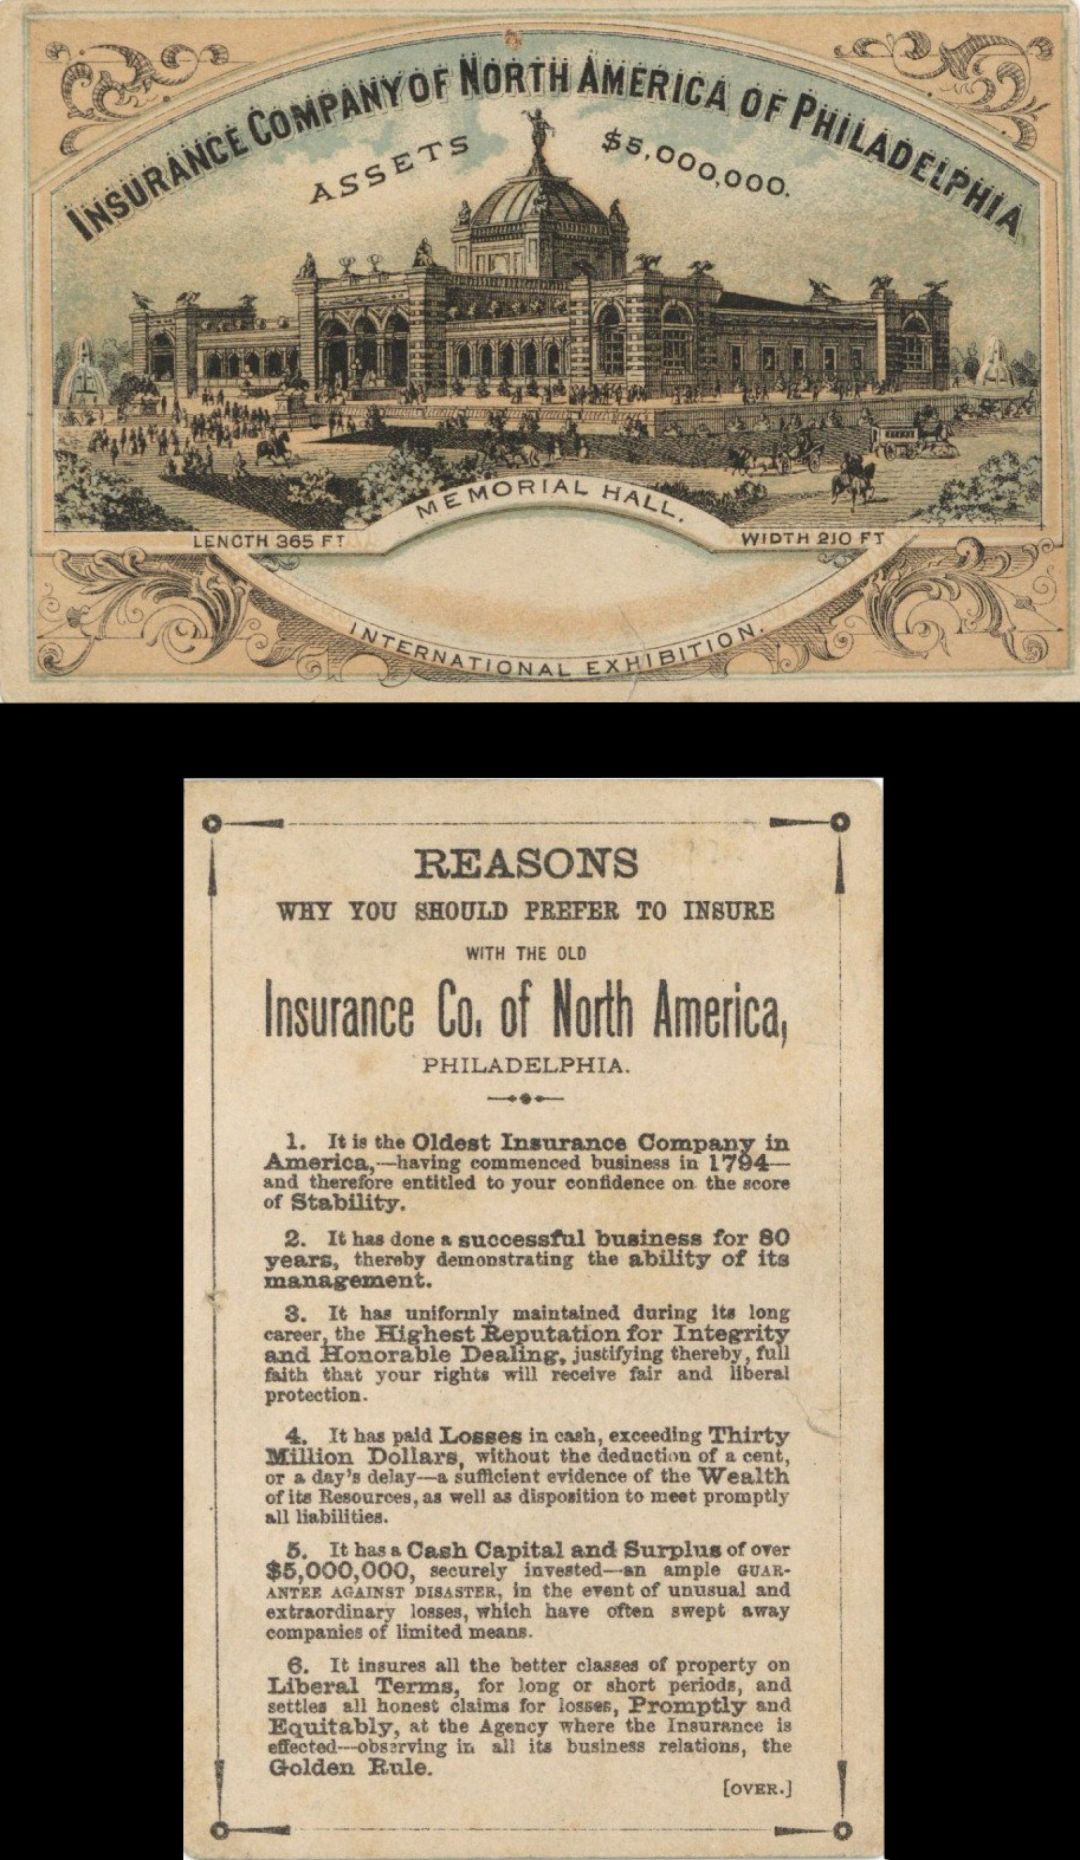 Advertising Card for Insurance Company of North America of Philadelphia  -  Insurance